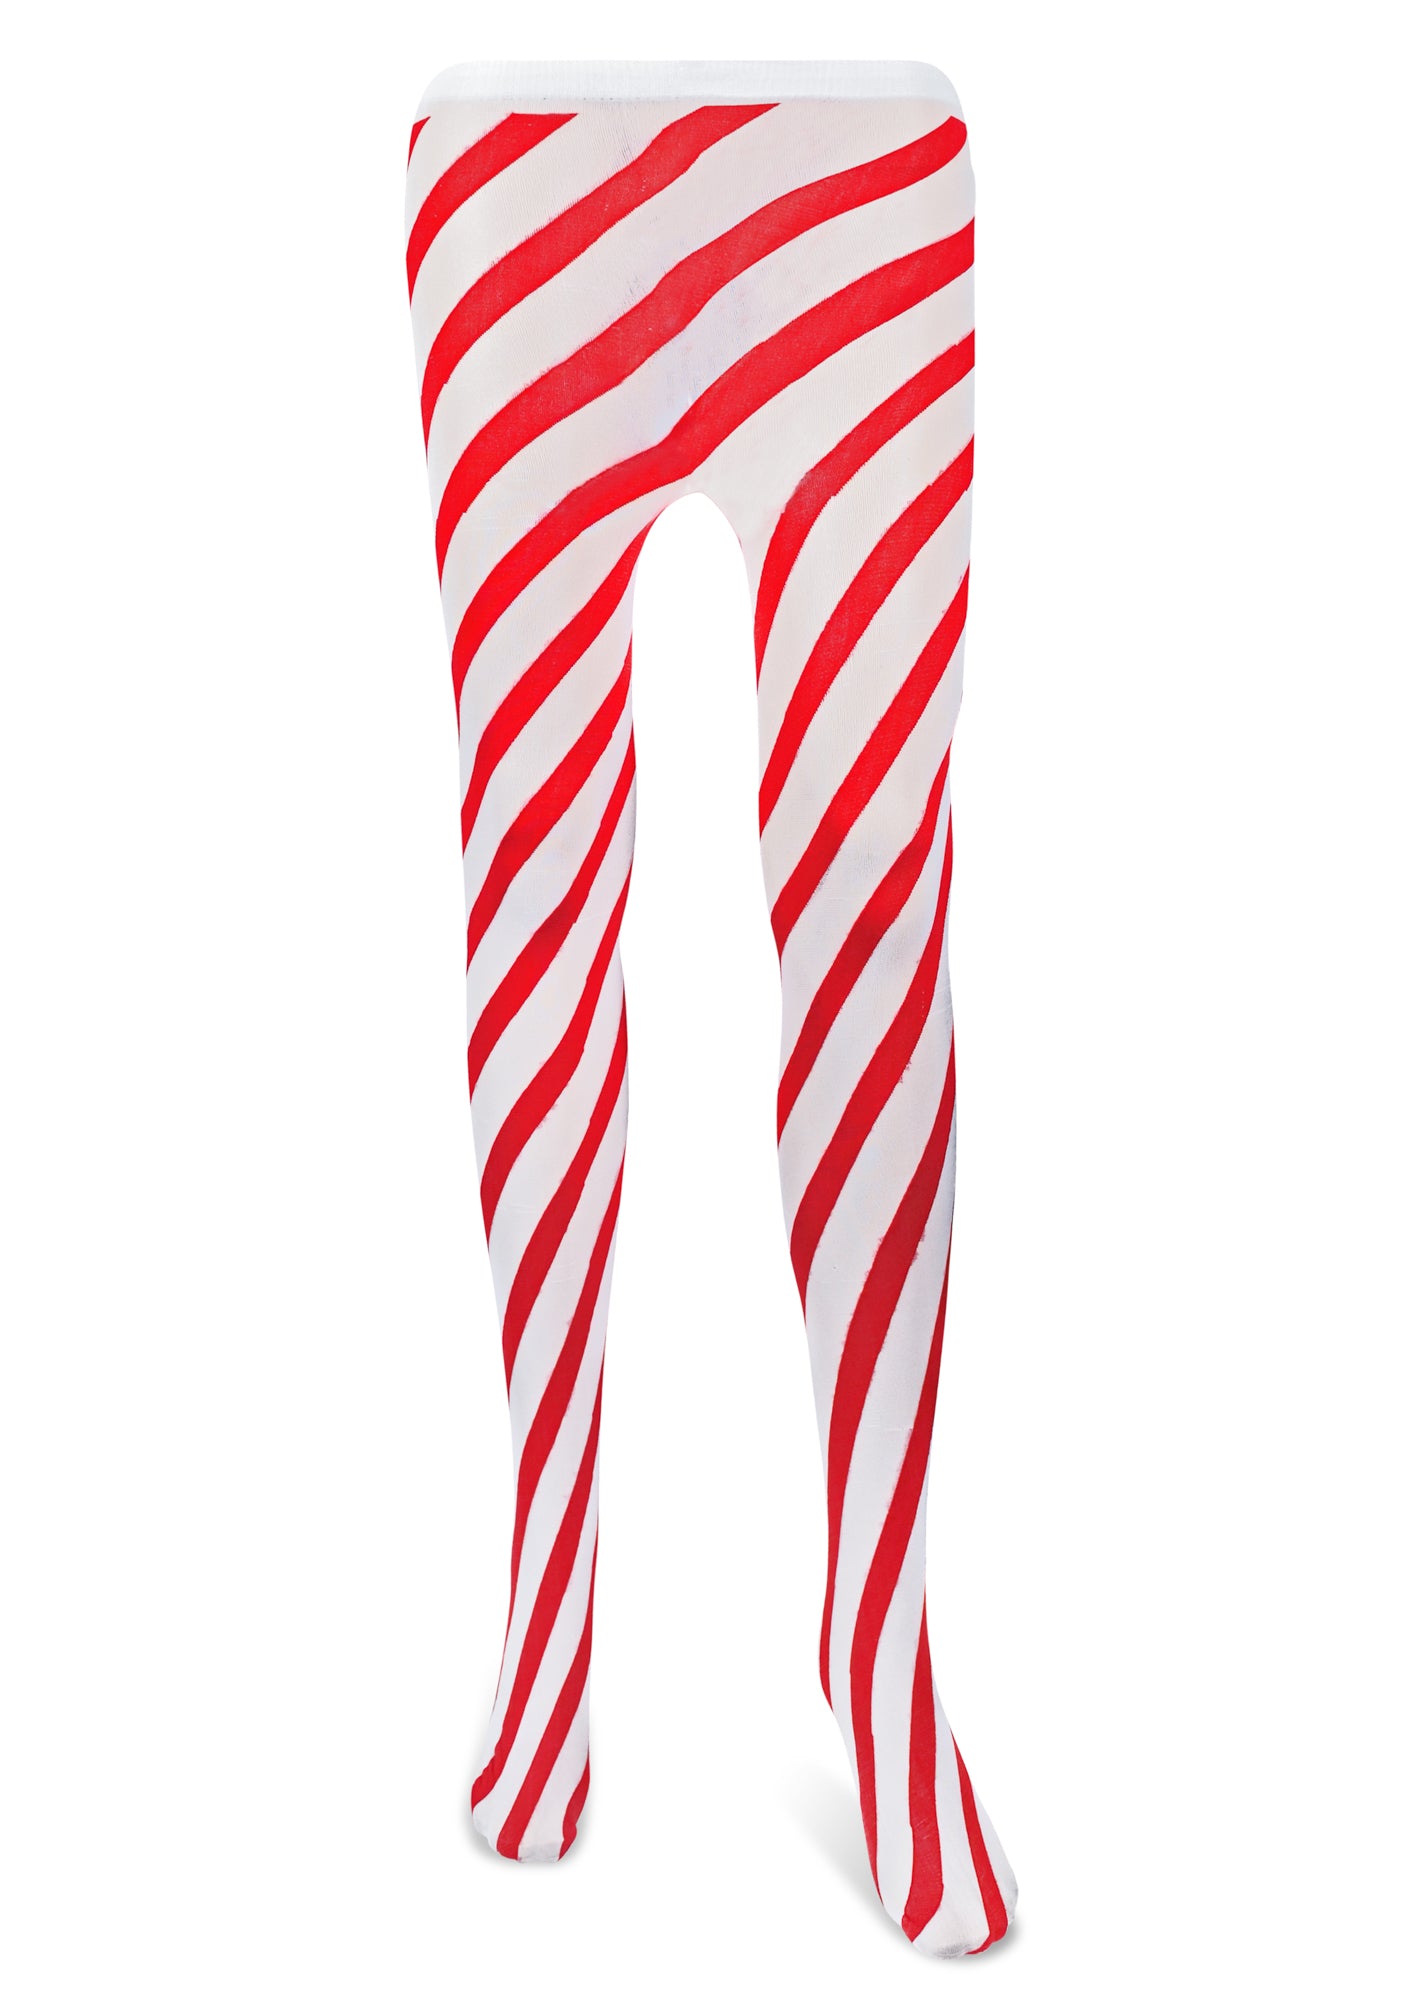 Candy Cane Striped Tights – Red and White Diagonally Striped Nylon Stretch  Pantyhose Stocking Accessories for Every Day Attire and Costumes for Teens  and Children's